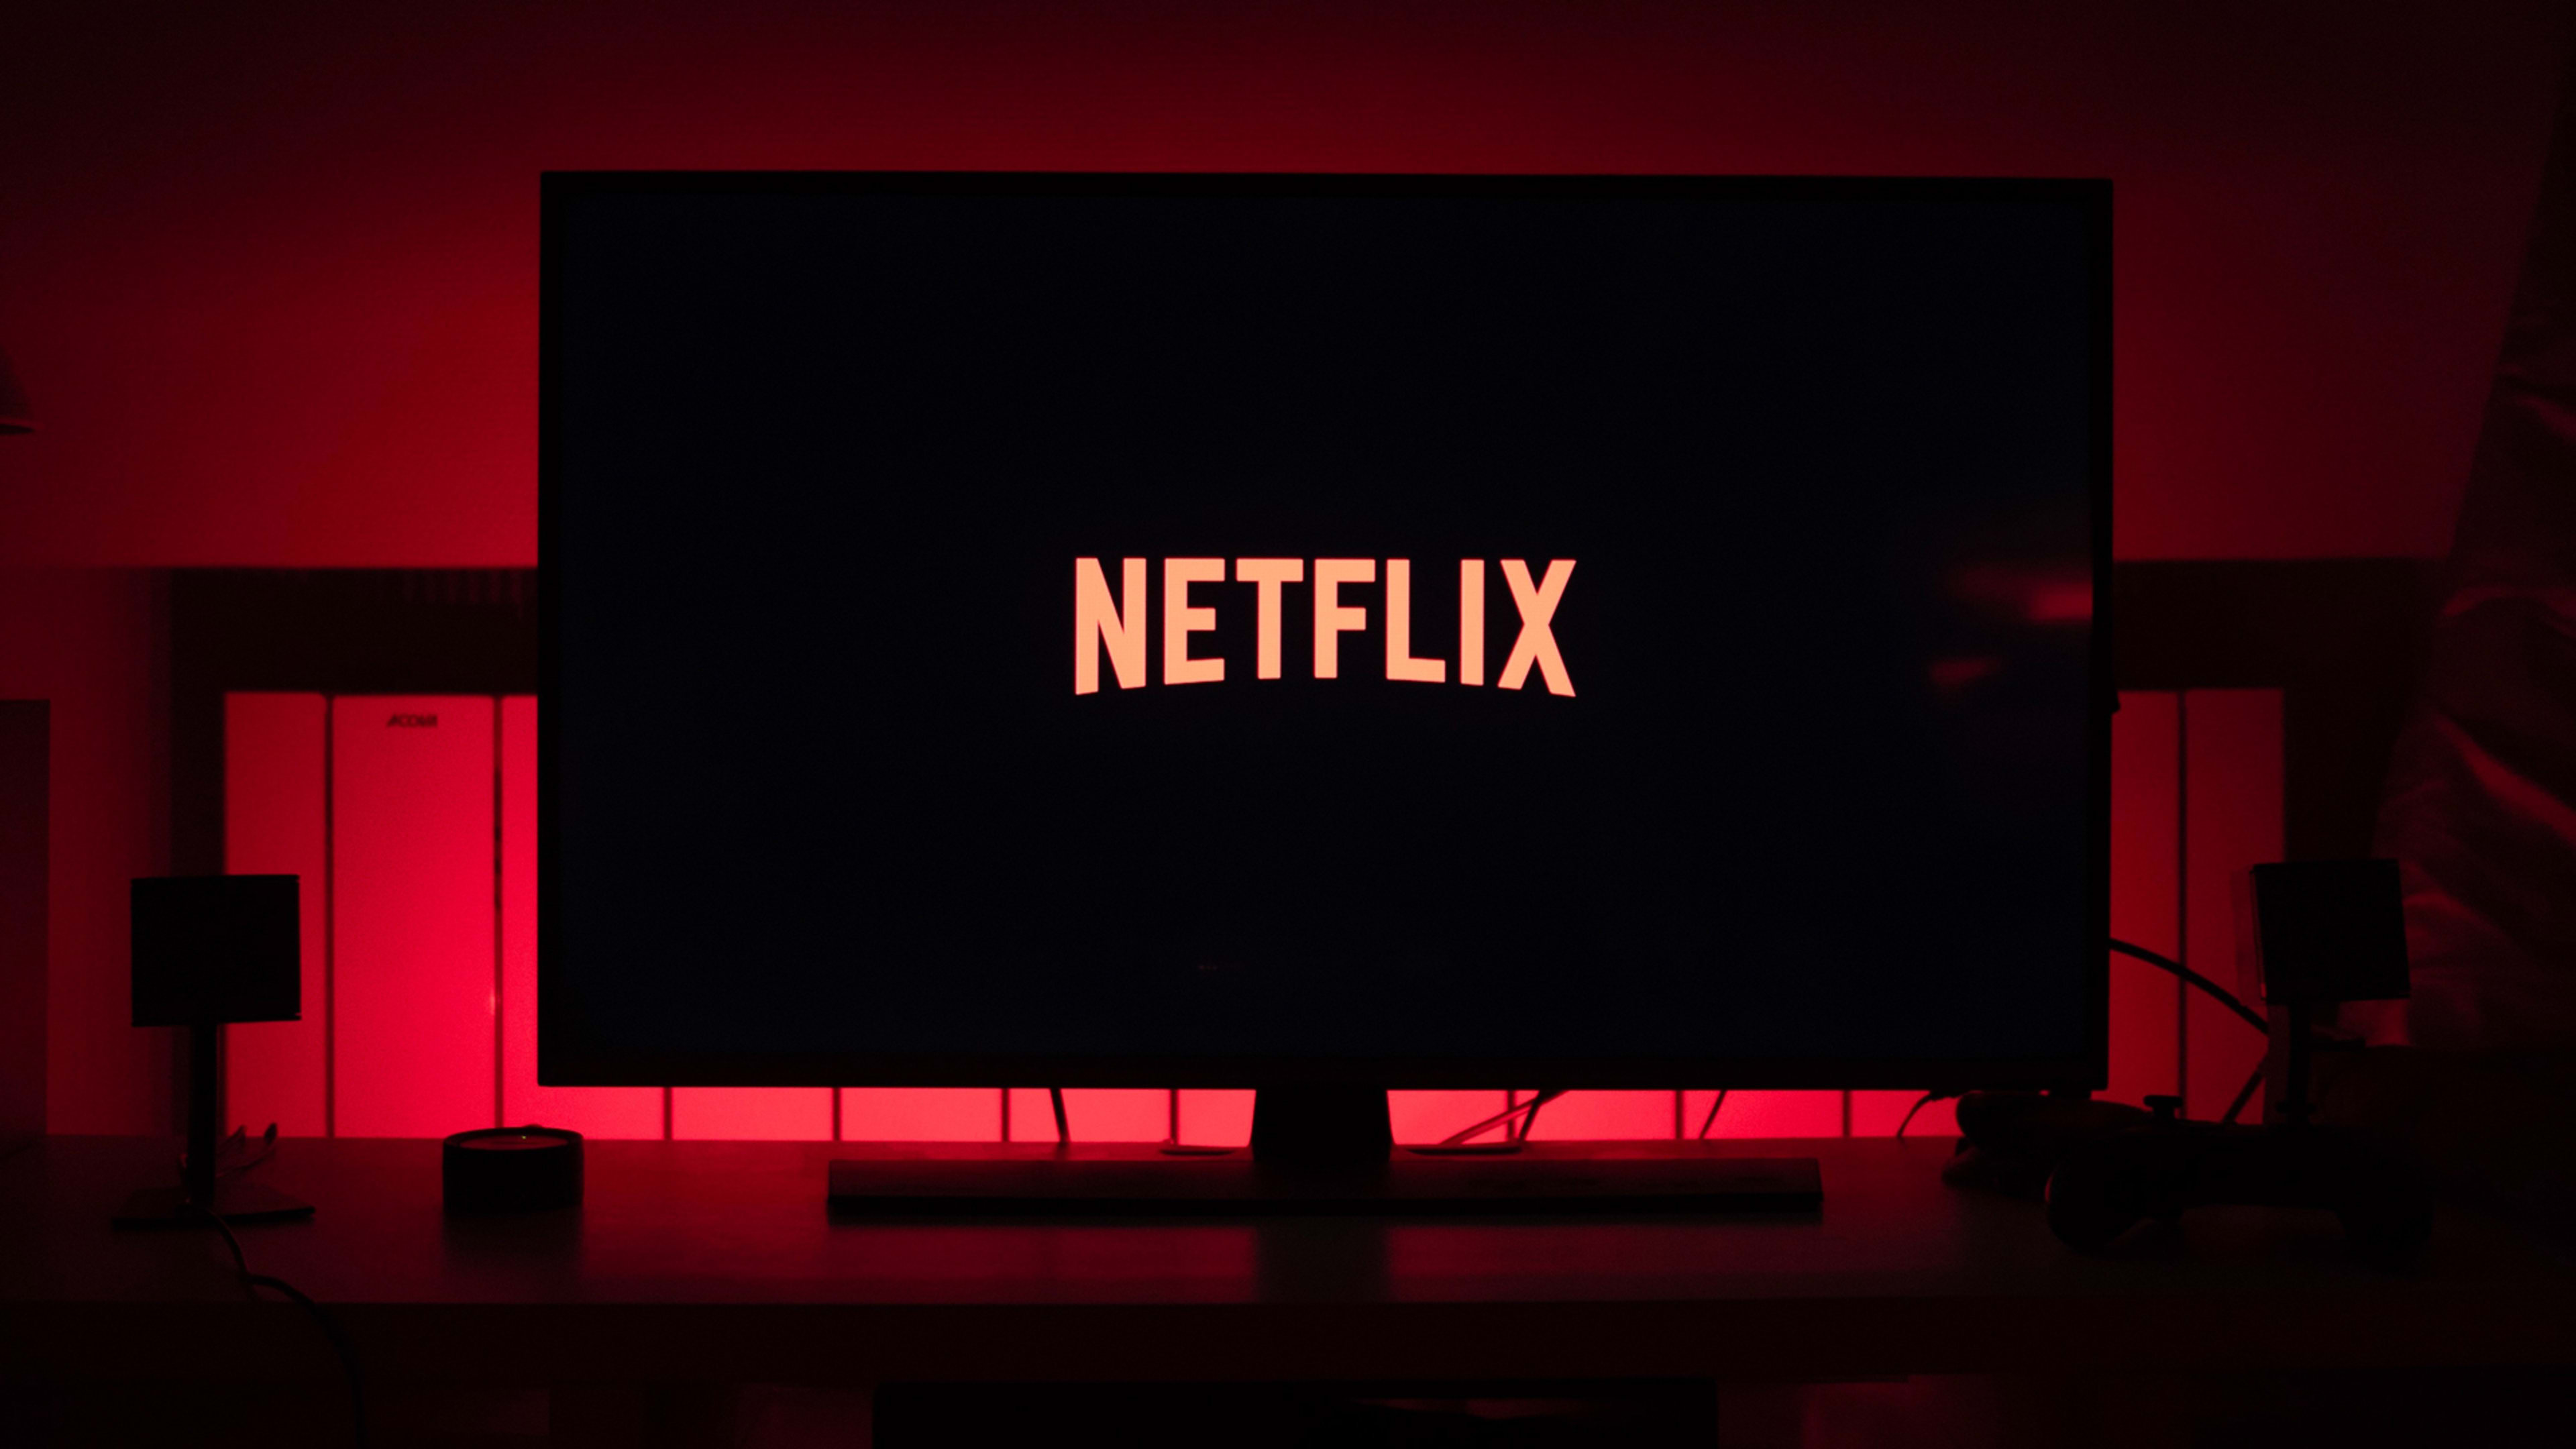 Your Netflix subscription could get cheaper